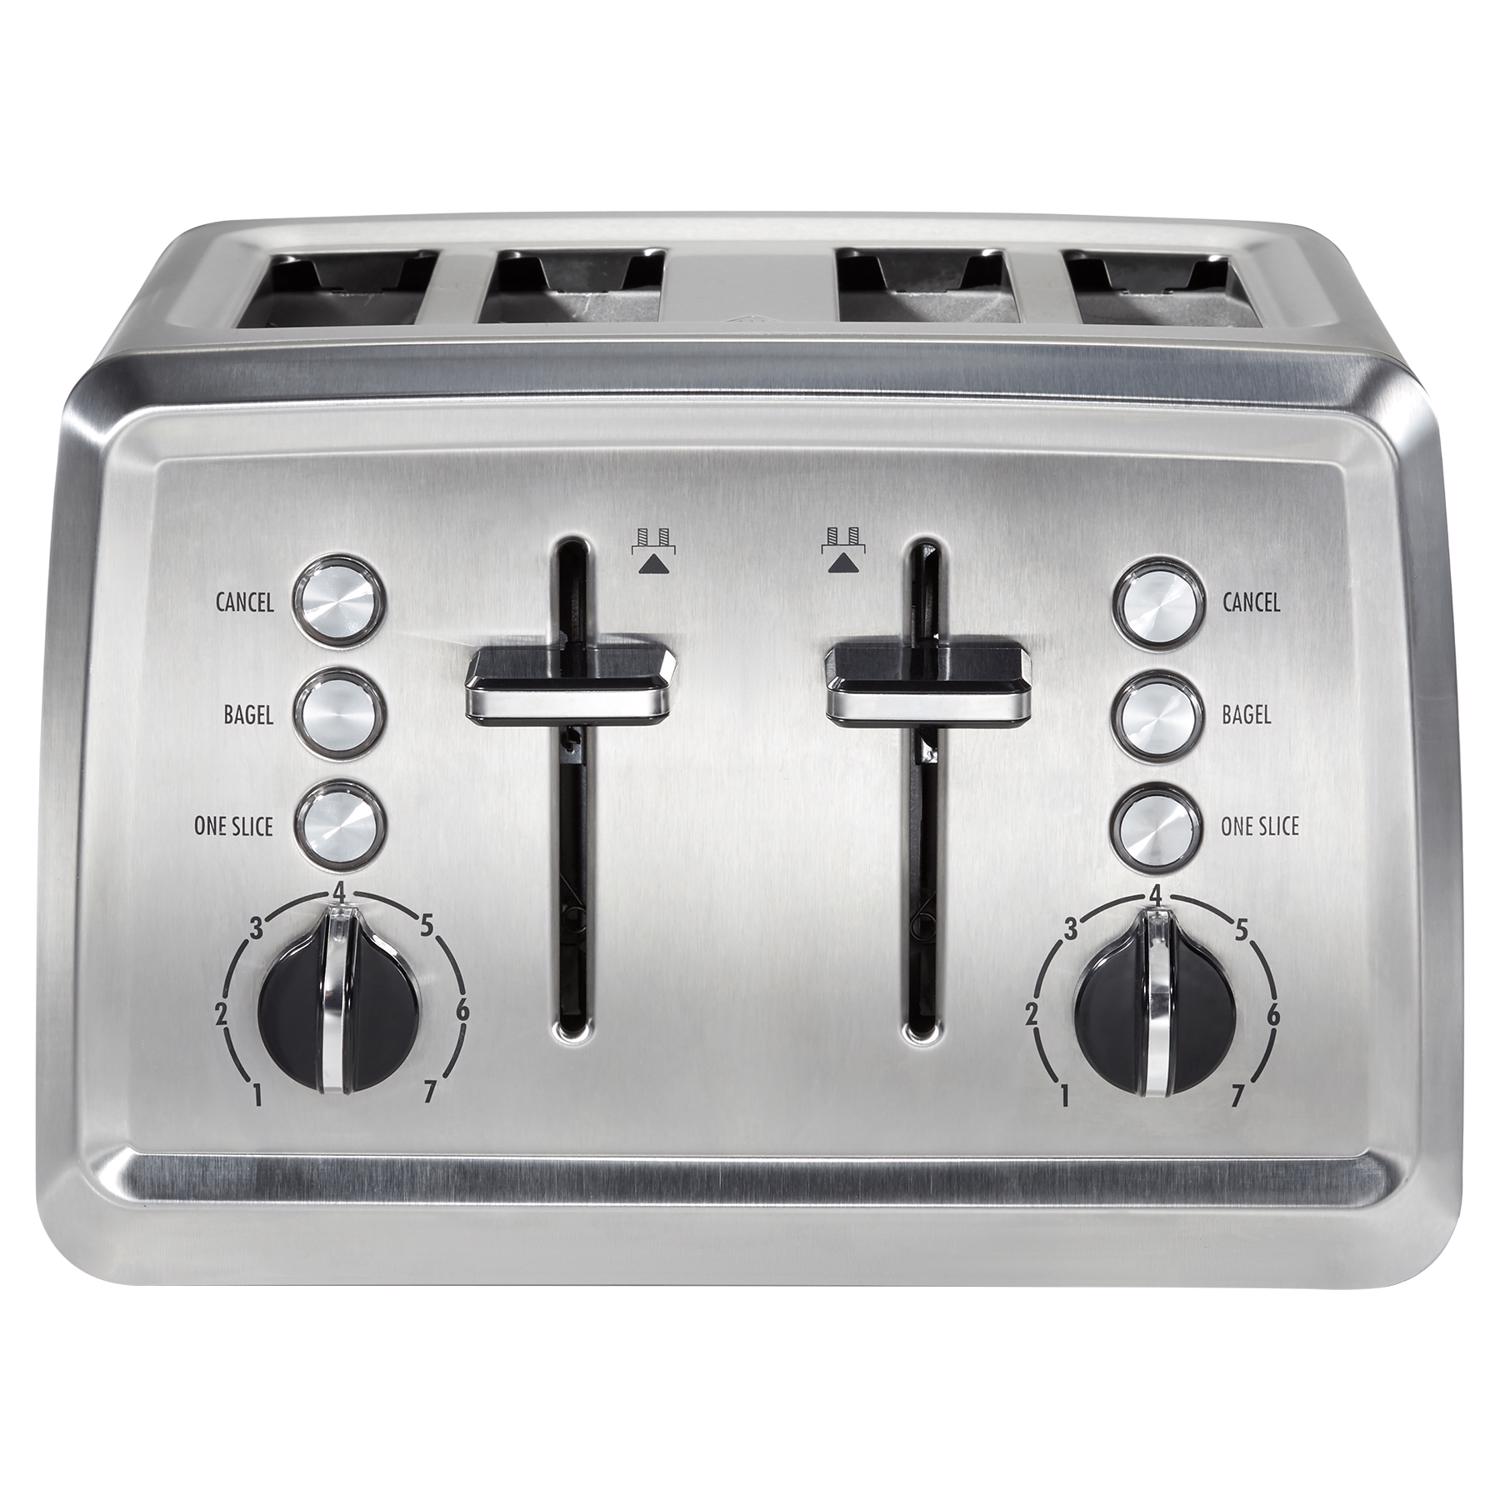 Hamilton Beach Stainless Steel Silver 4 slot Toaster 7.68 in. H X 11.1 in. W X 11 in. D